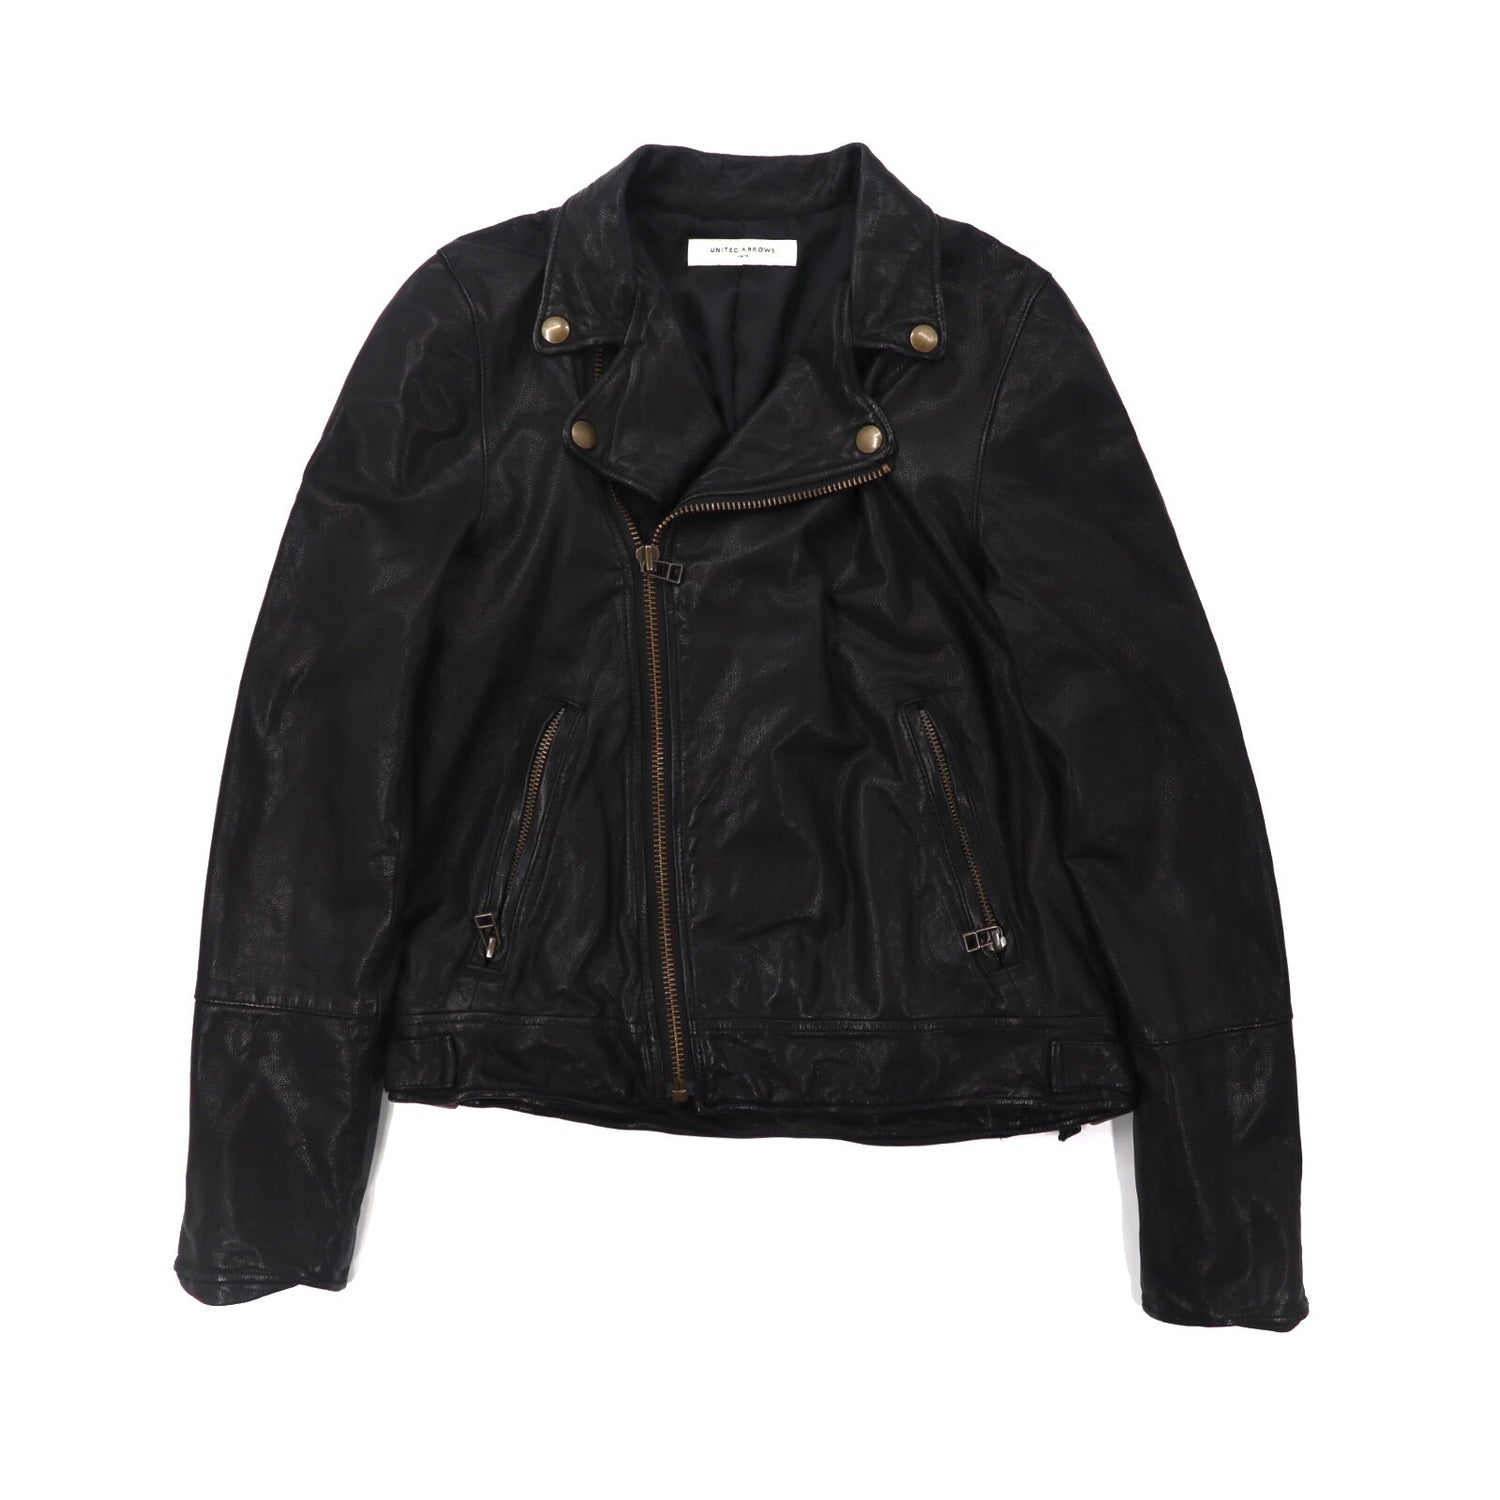 United ARROWS Double Riders Jacket 36 Black Goat Leather 1525-136